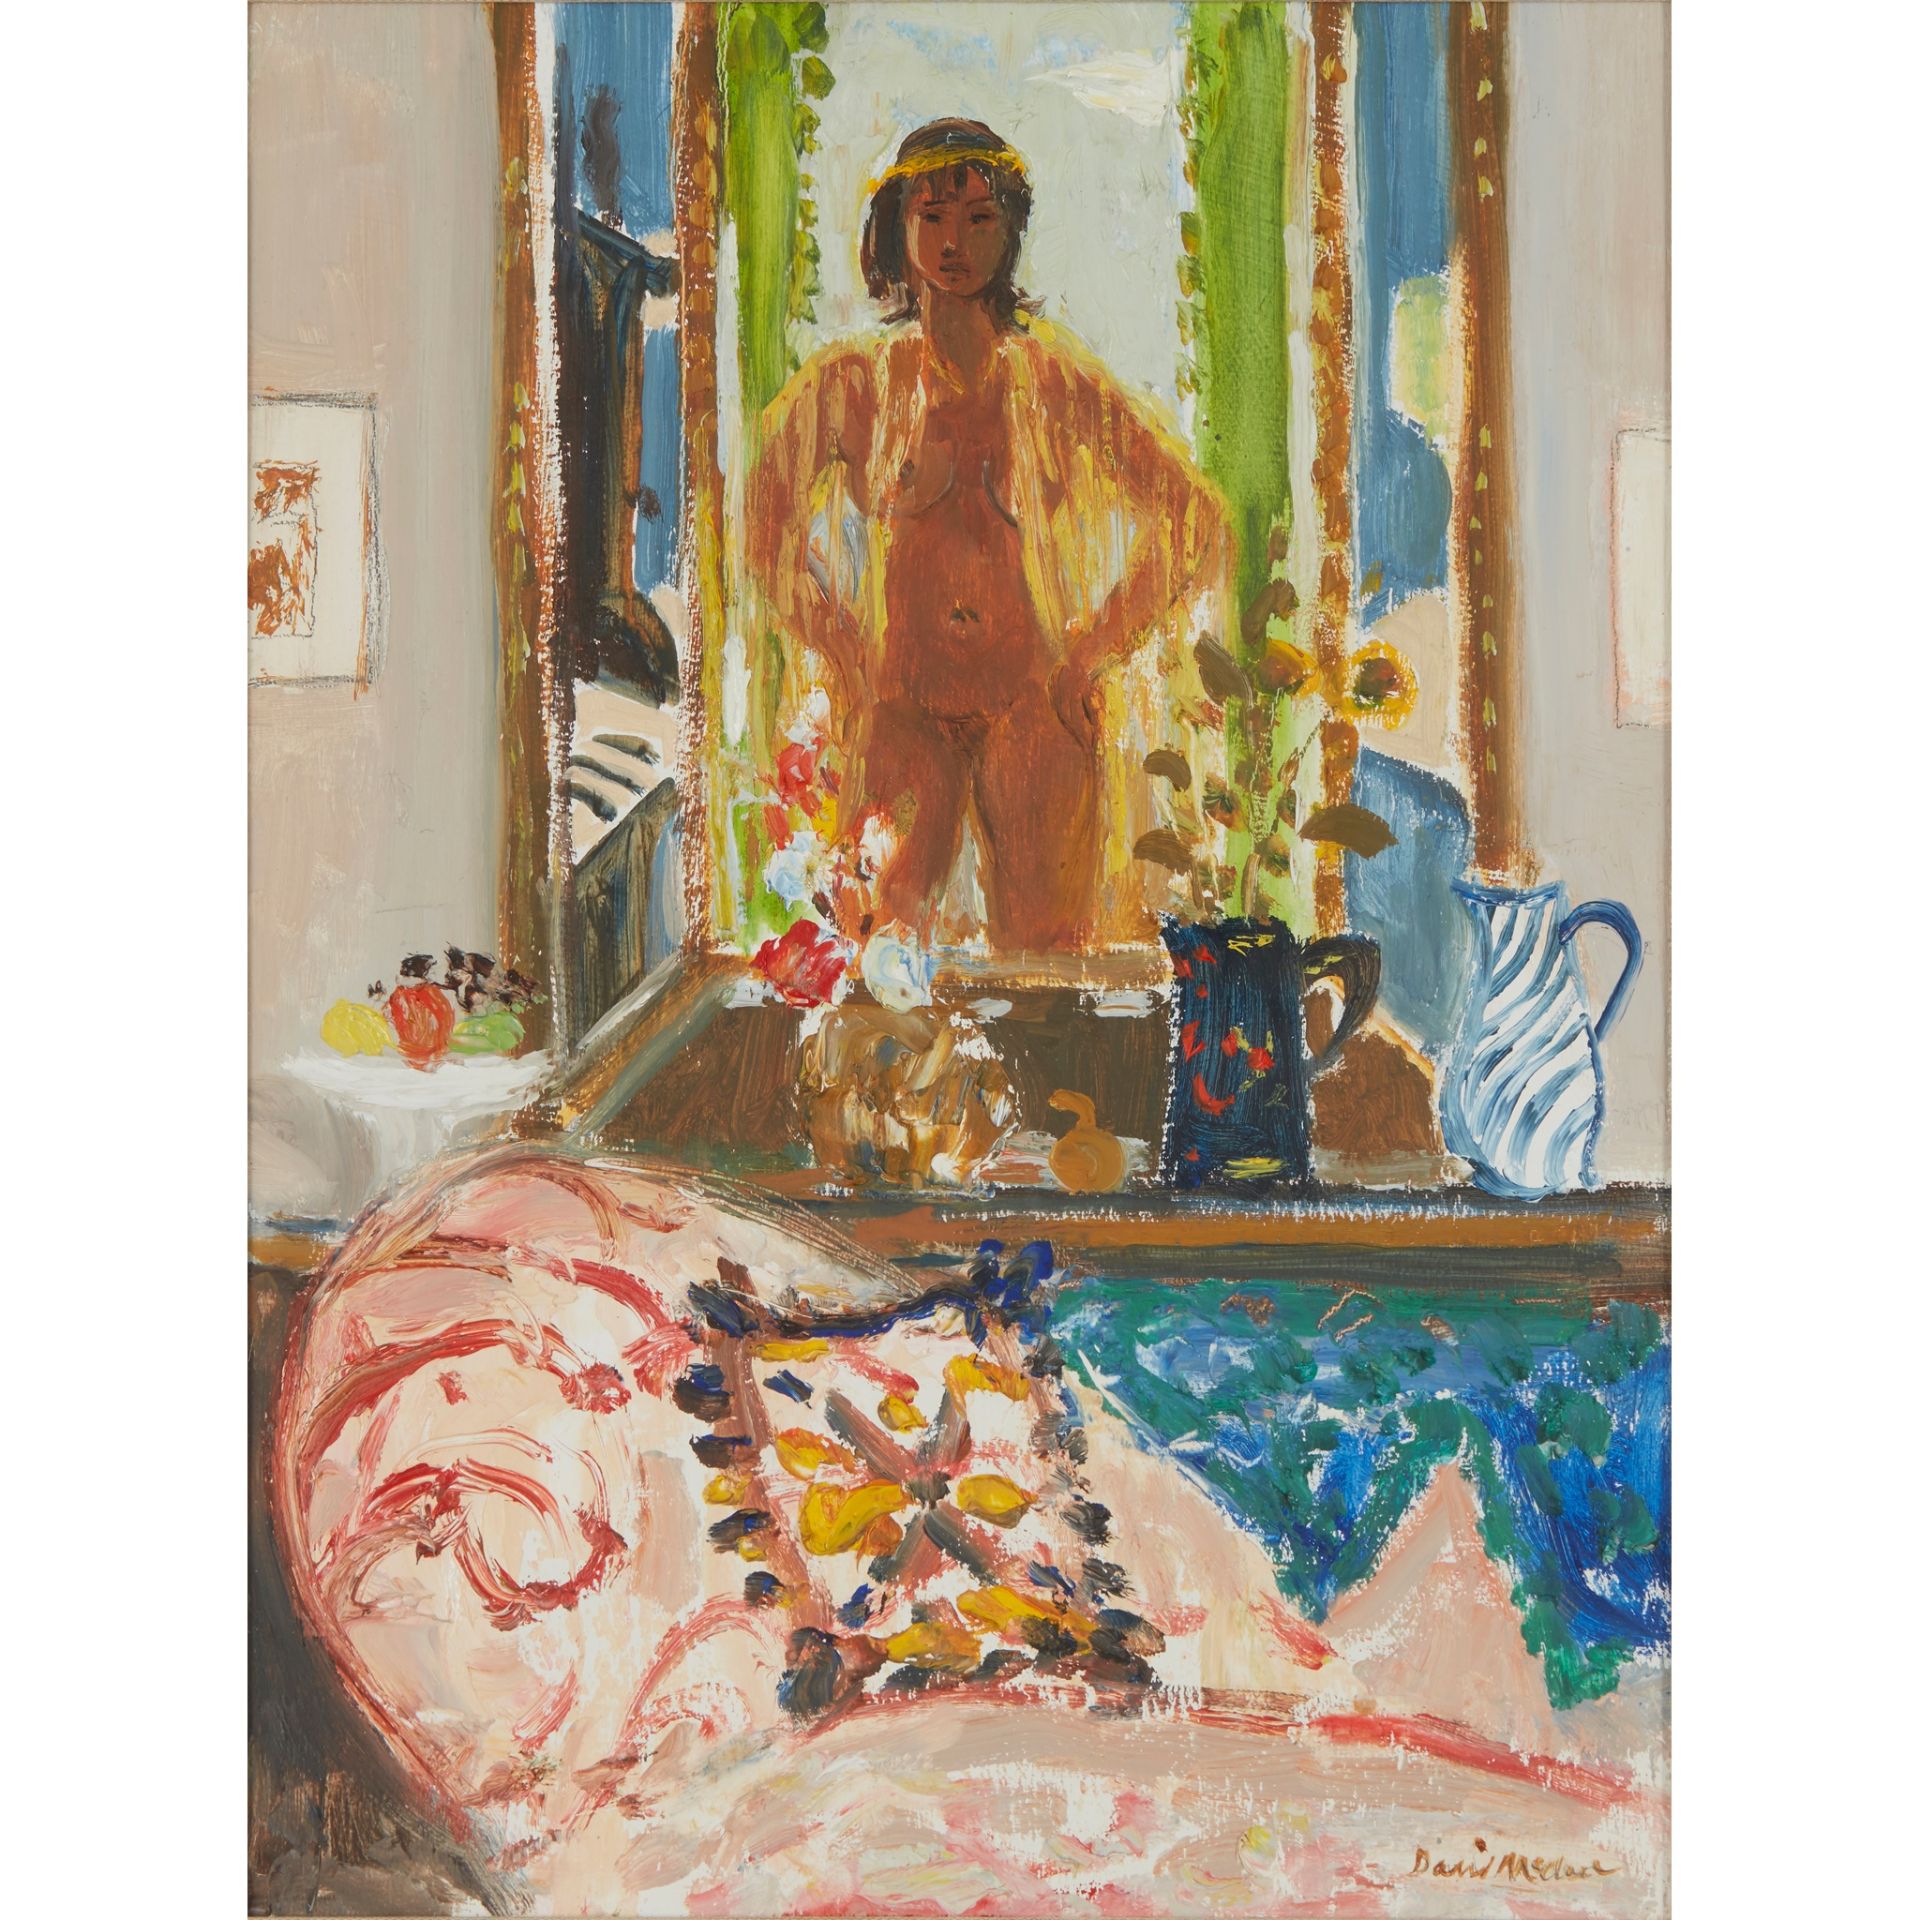 § DAVID MCCLURE R.S.A., R.S.W. (SCOTTISH 1926-1998) GIRL IN A MIRROR WITH PATTERNED SOFA - 1981